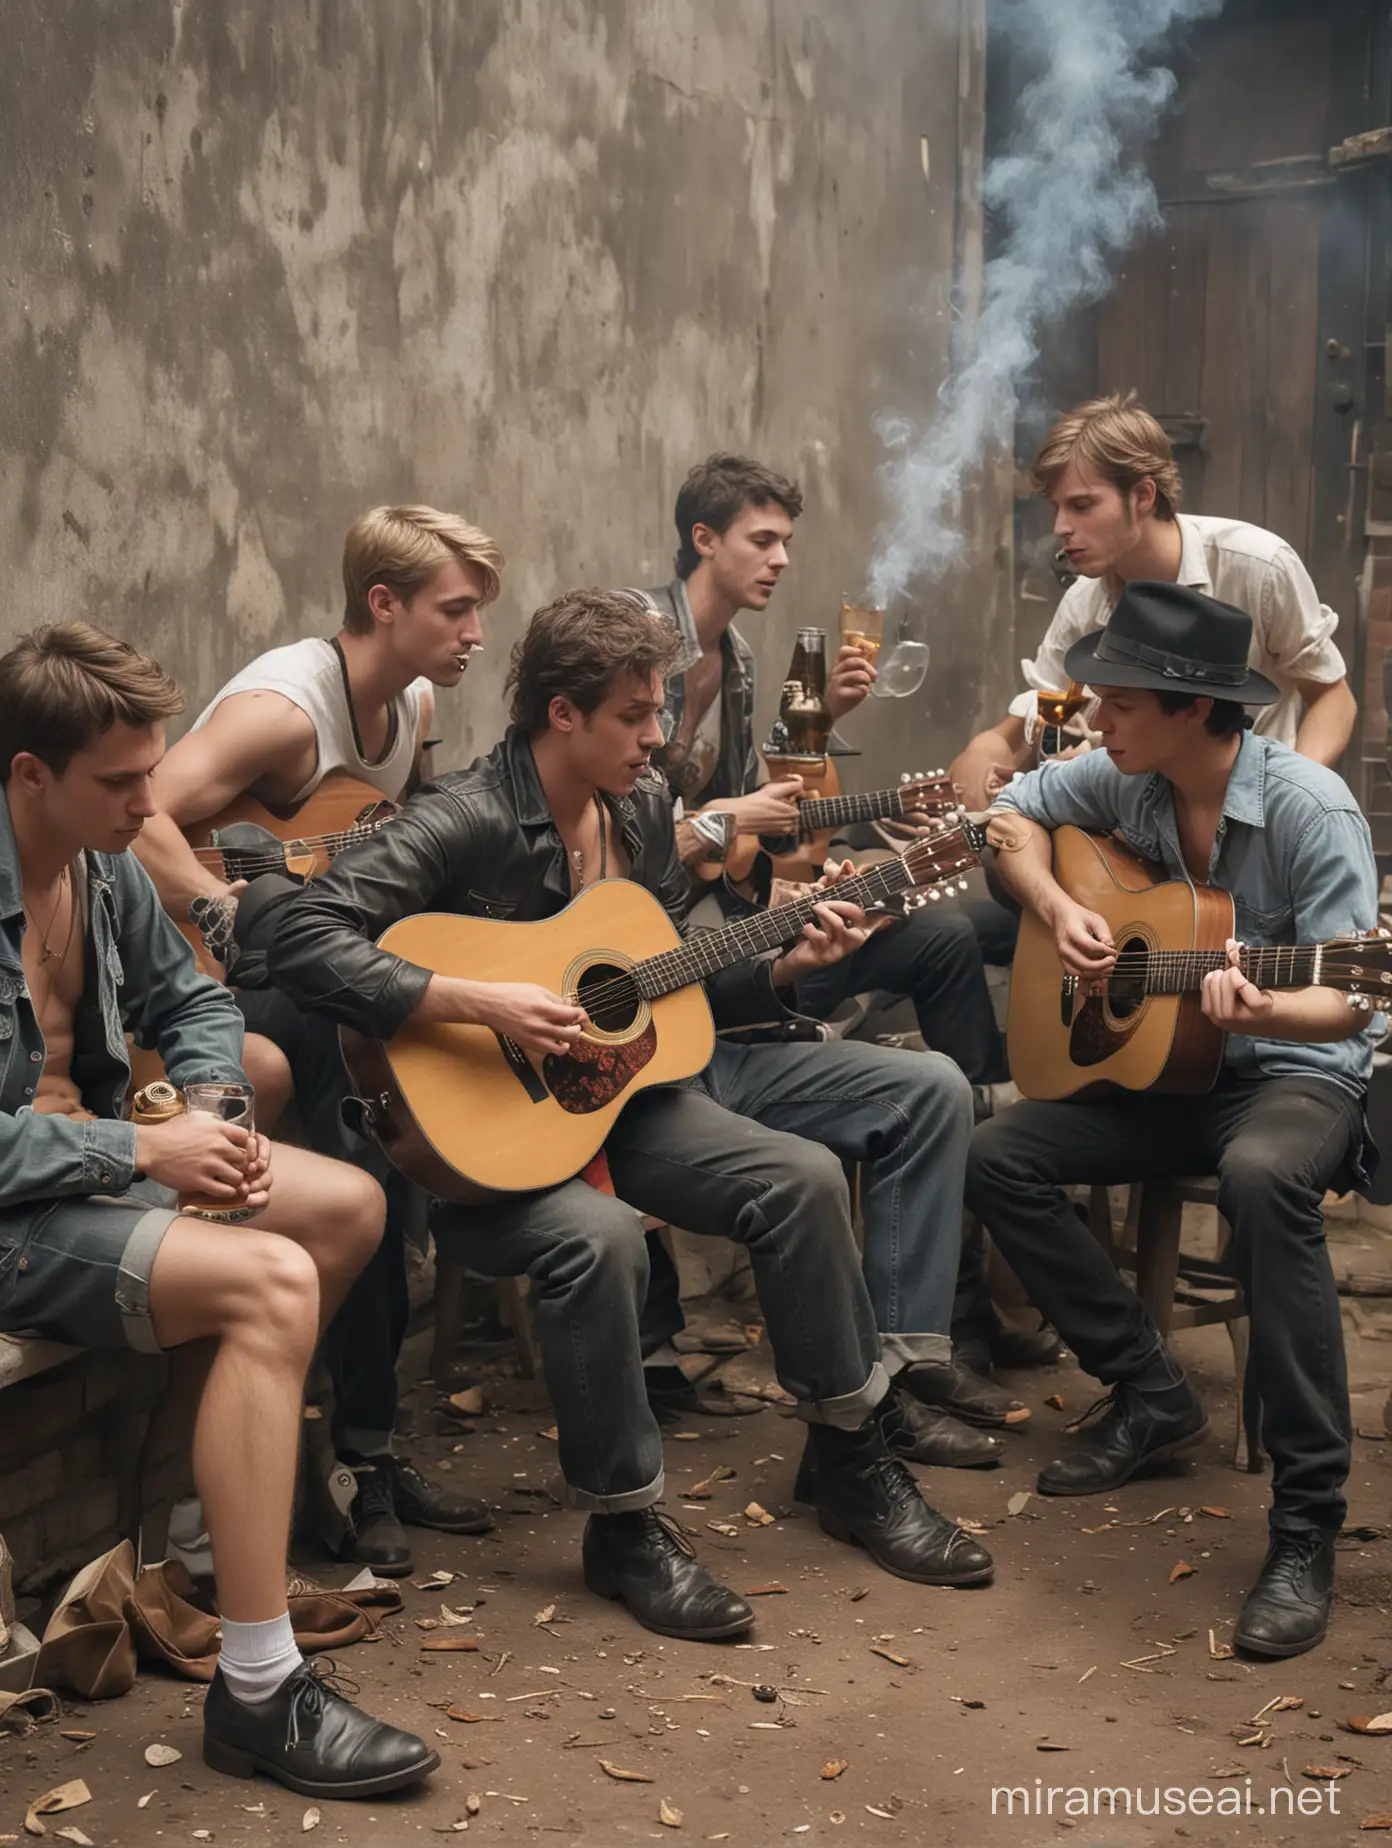 A group of young men, some playing guitar, some drinking beer while smoking, some stroking a rooster.